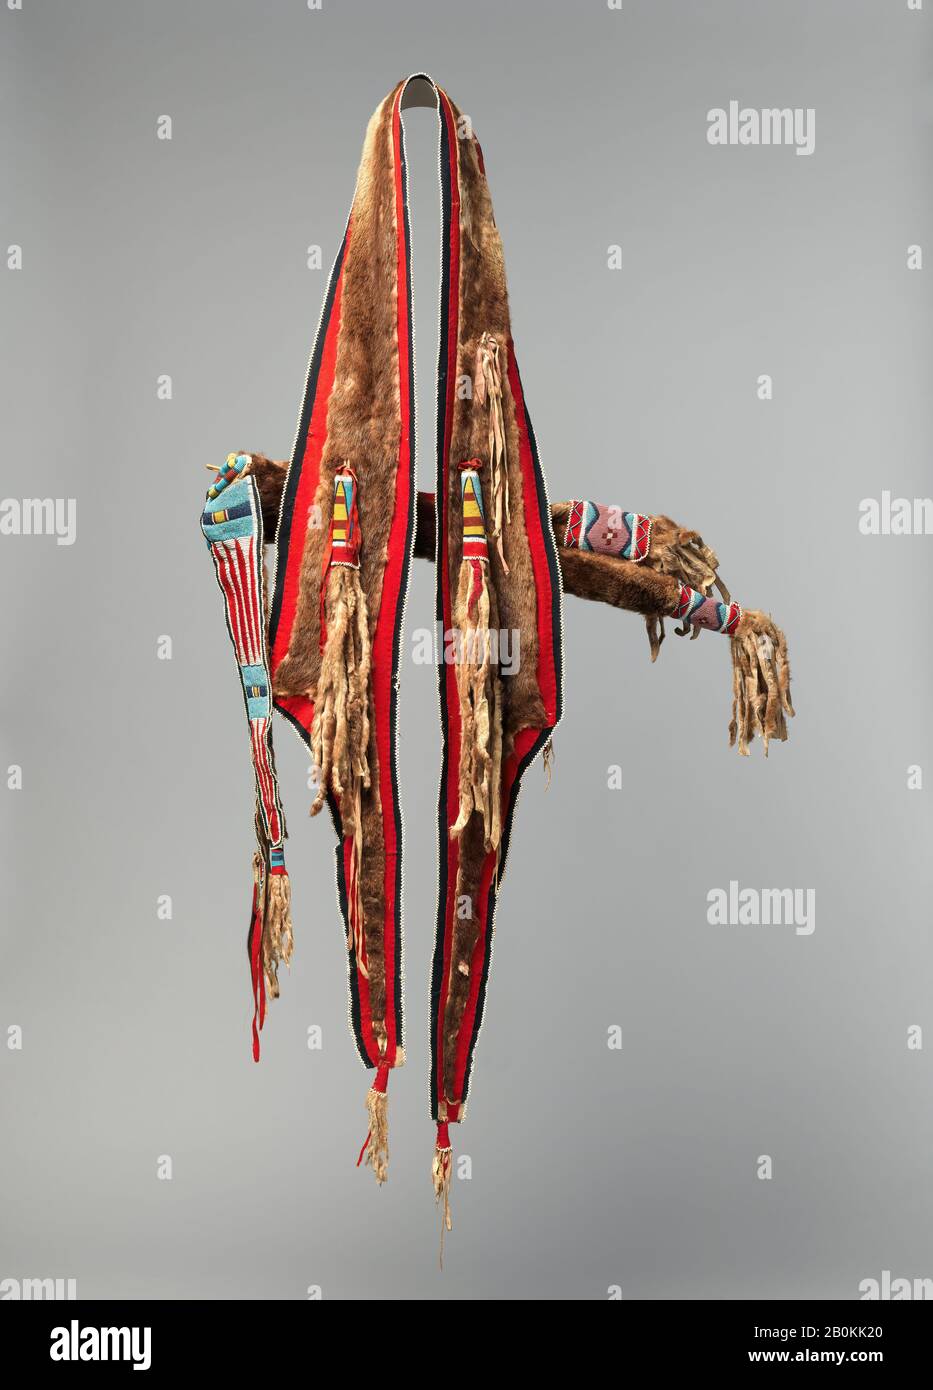 Nez Perce artist, Bowcase and Quiver, Nez Perce, Nez Perce artist, ca. 1870, Idaho, Oregon, or Washington, United States; United States, Nez Perce, Otter skin, native-tanned leather, wool cloth, glass beads, ermine, and silk ribbon, Overall: H. 45 in. (114.3 cm), Other (quiver): H. 32 1/4 x W. 6 1/4 in. (81.9 x 15.9 cm), Other (bowcase): H. 38 1/2 x W. 3 5/8 in. (97.8 x 9.2 cm Stock Photo